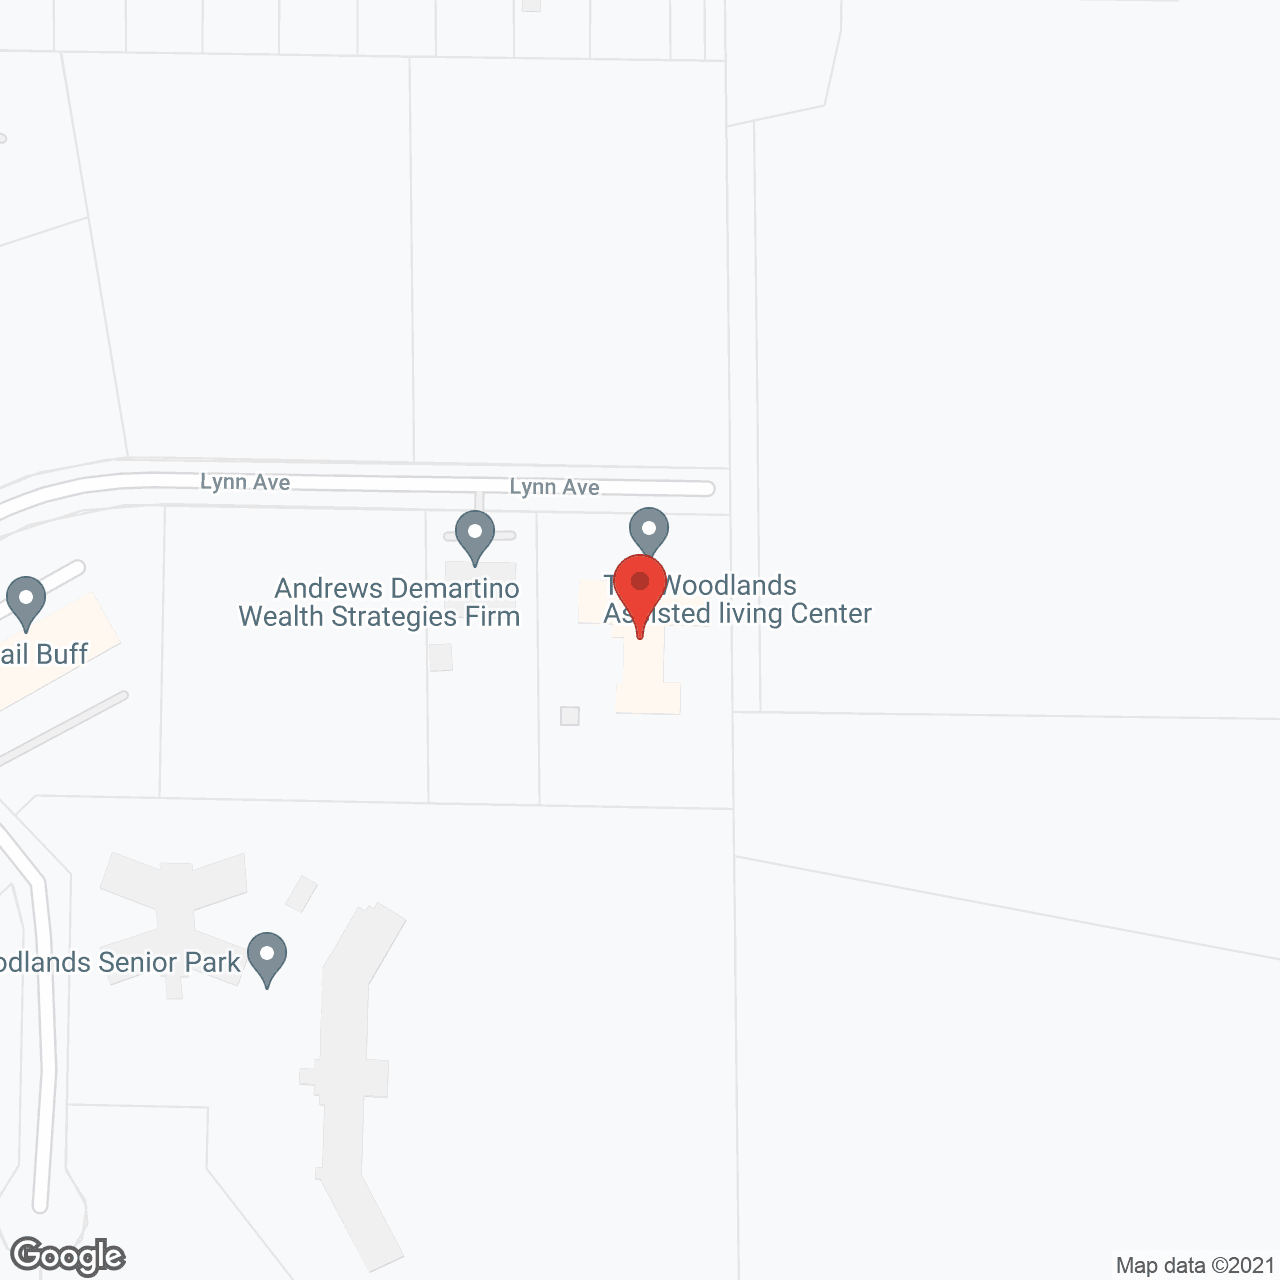 Woodlands of Fond du Lac in google map